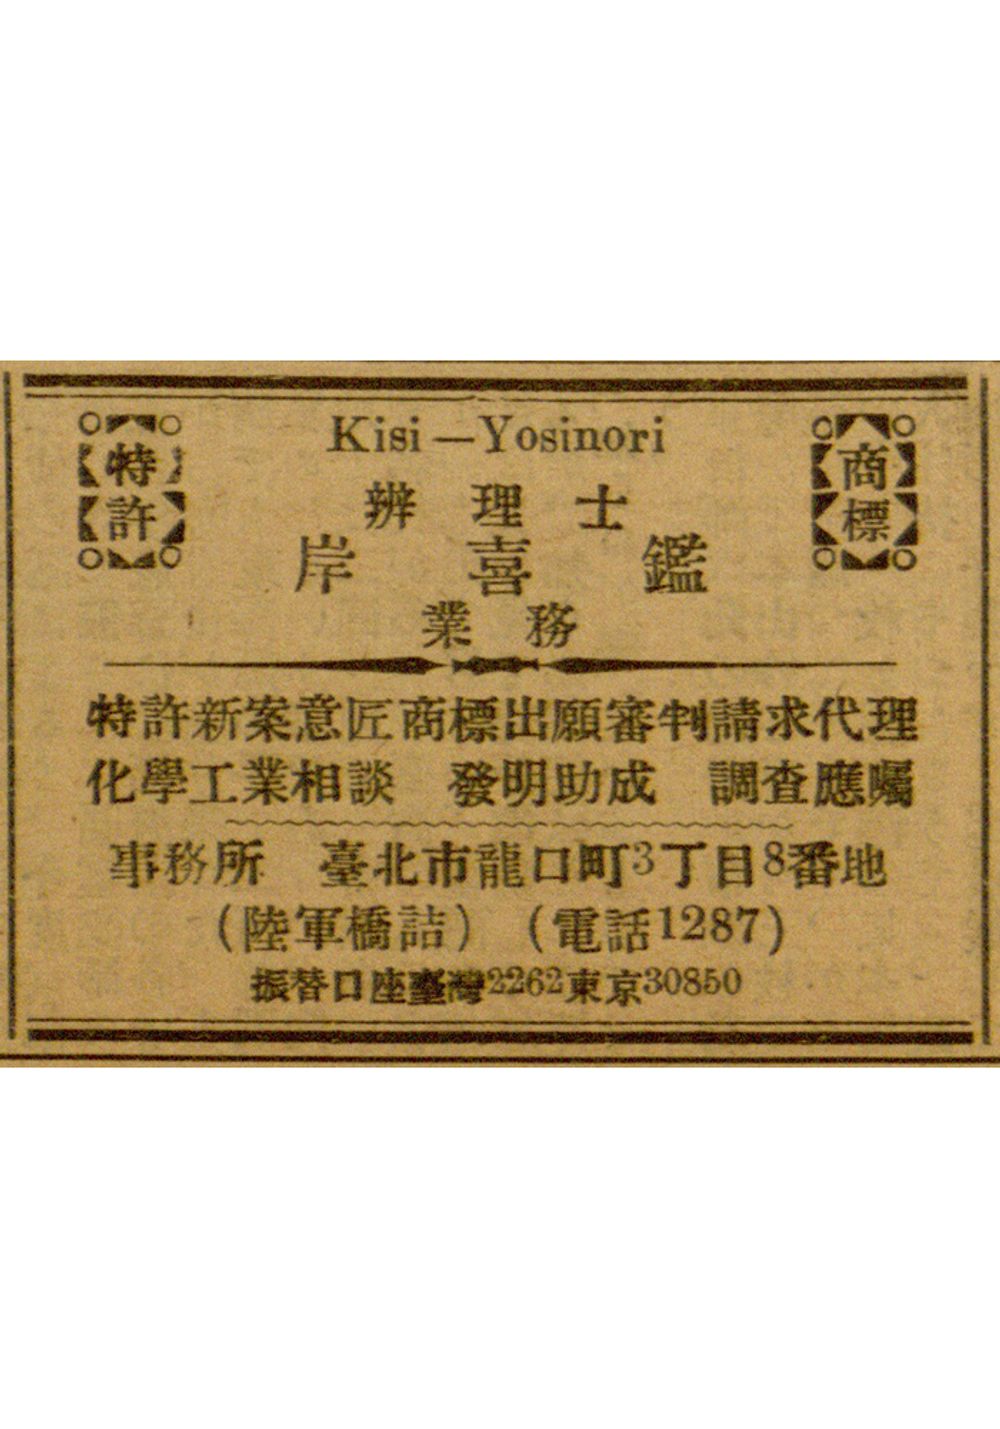 Advertisement for trademark and patent agency business during mid-Japanese colonial period